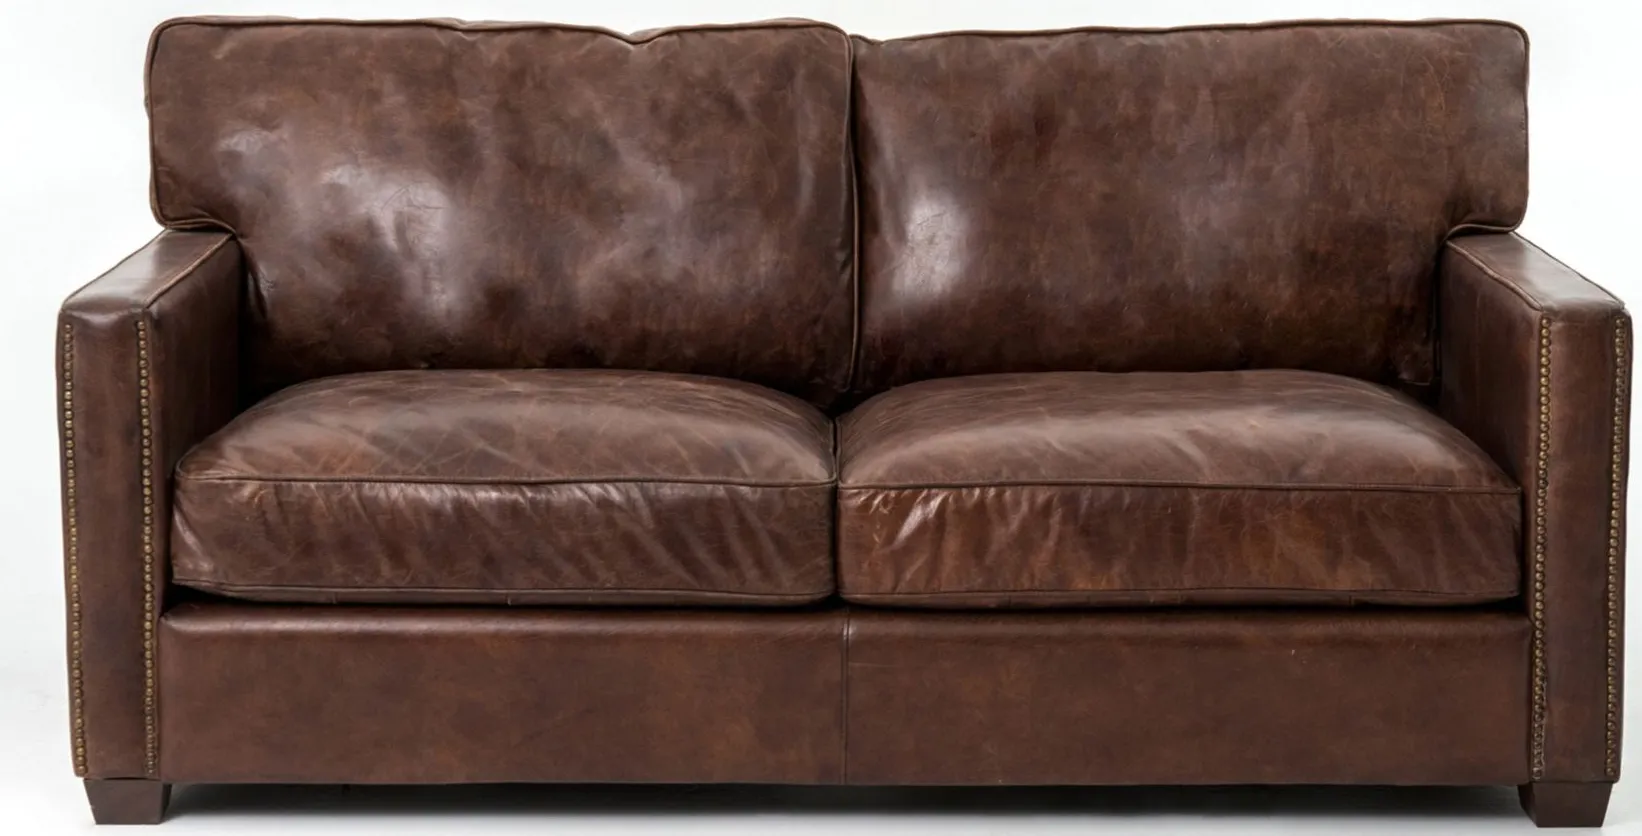 Larkin Leather Sofa in Cigar by Four Hands